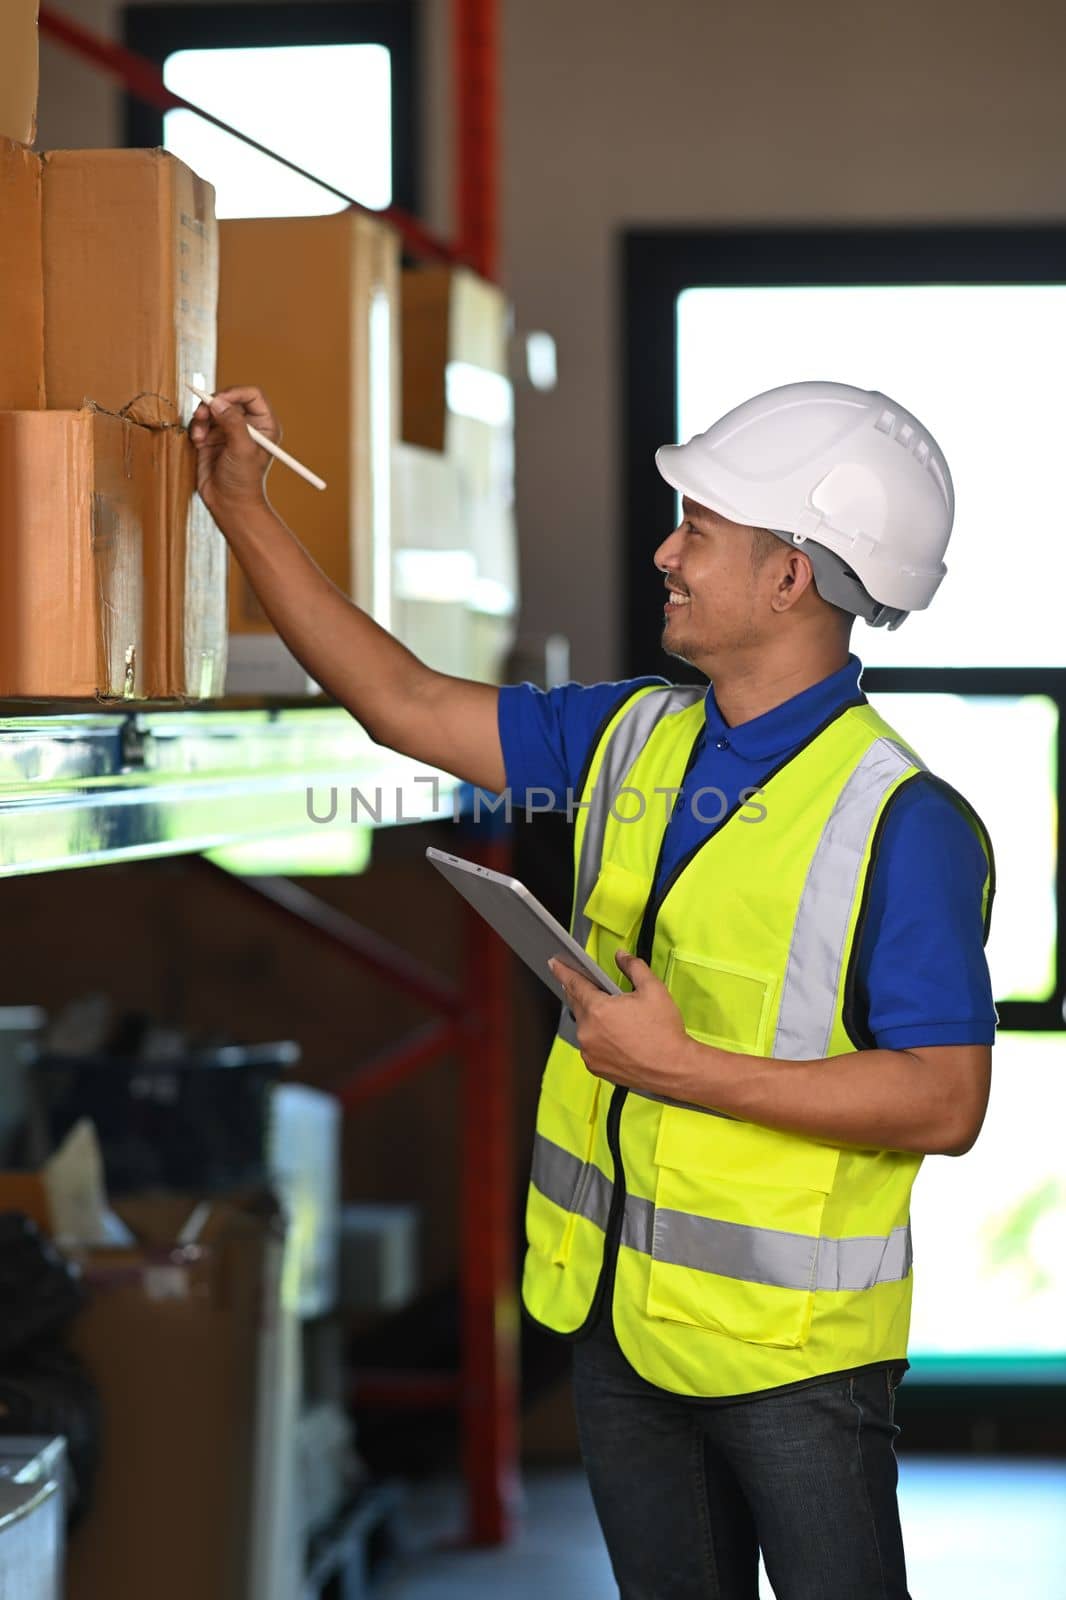 Warehouse worker checking order details on a tablet while standing between retail warehouse full of shelves.